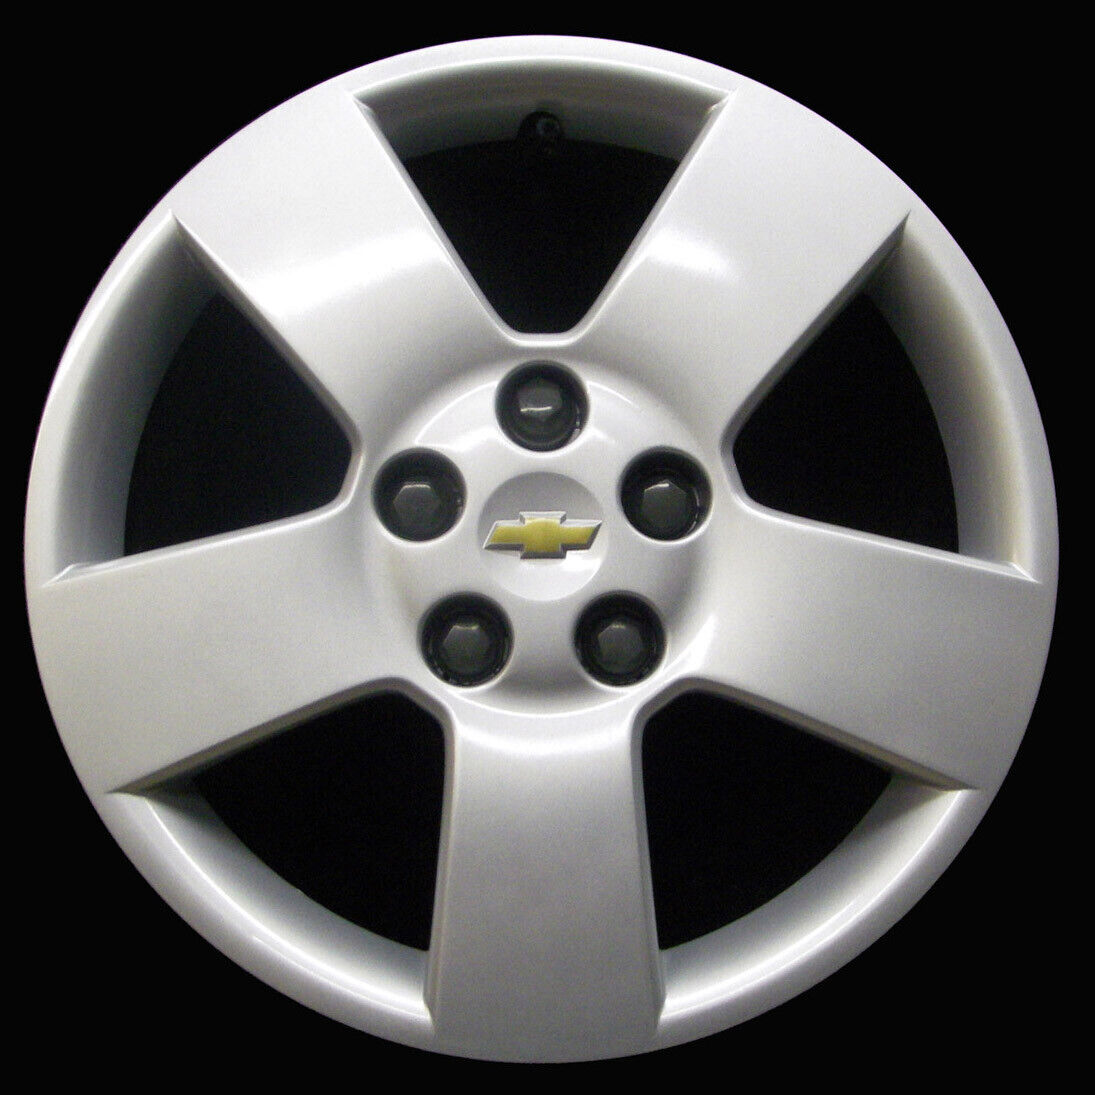 Hubcap for Chevy HHR 2006-2011, Genuine GM Factory OEM 16-inch Wheel Cover 3251